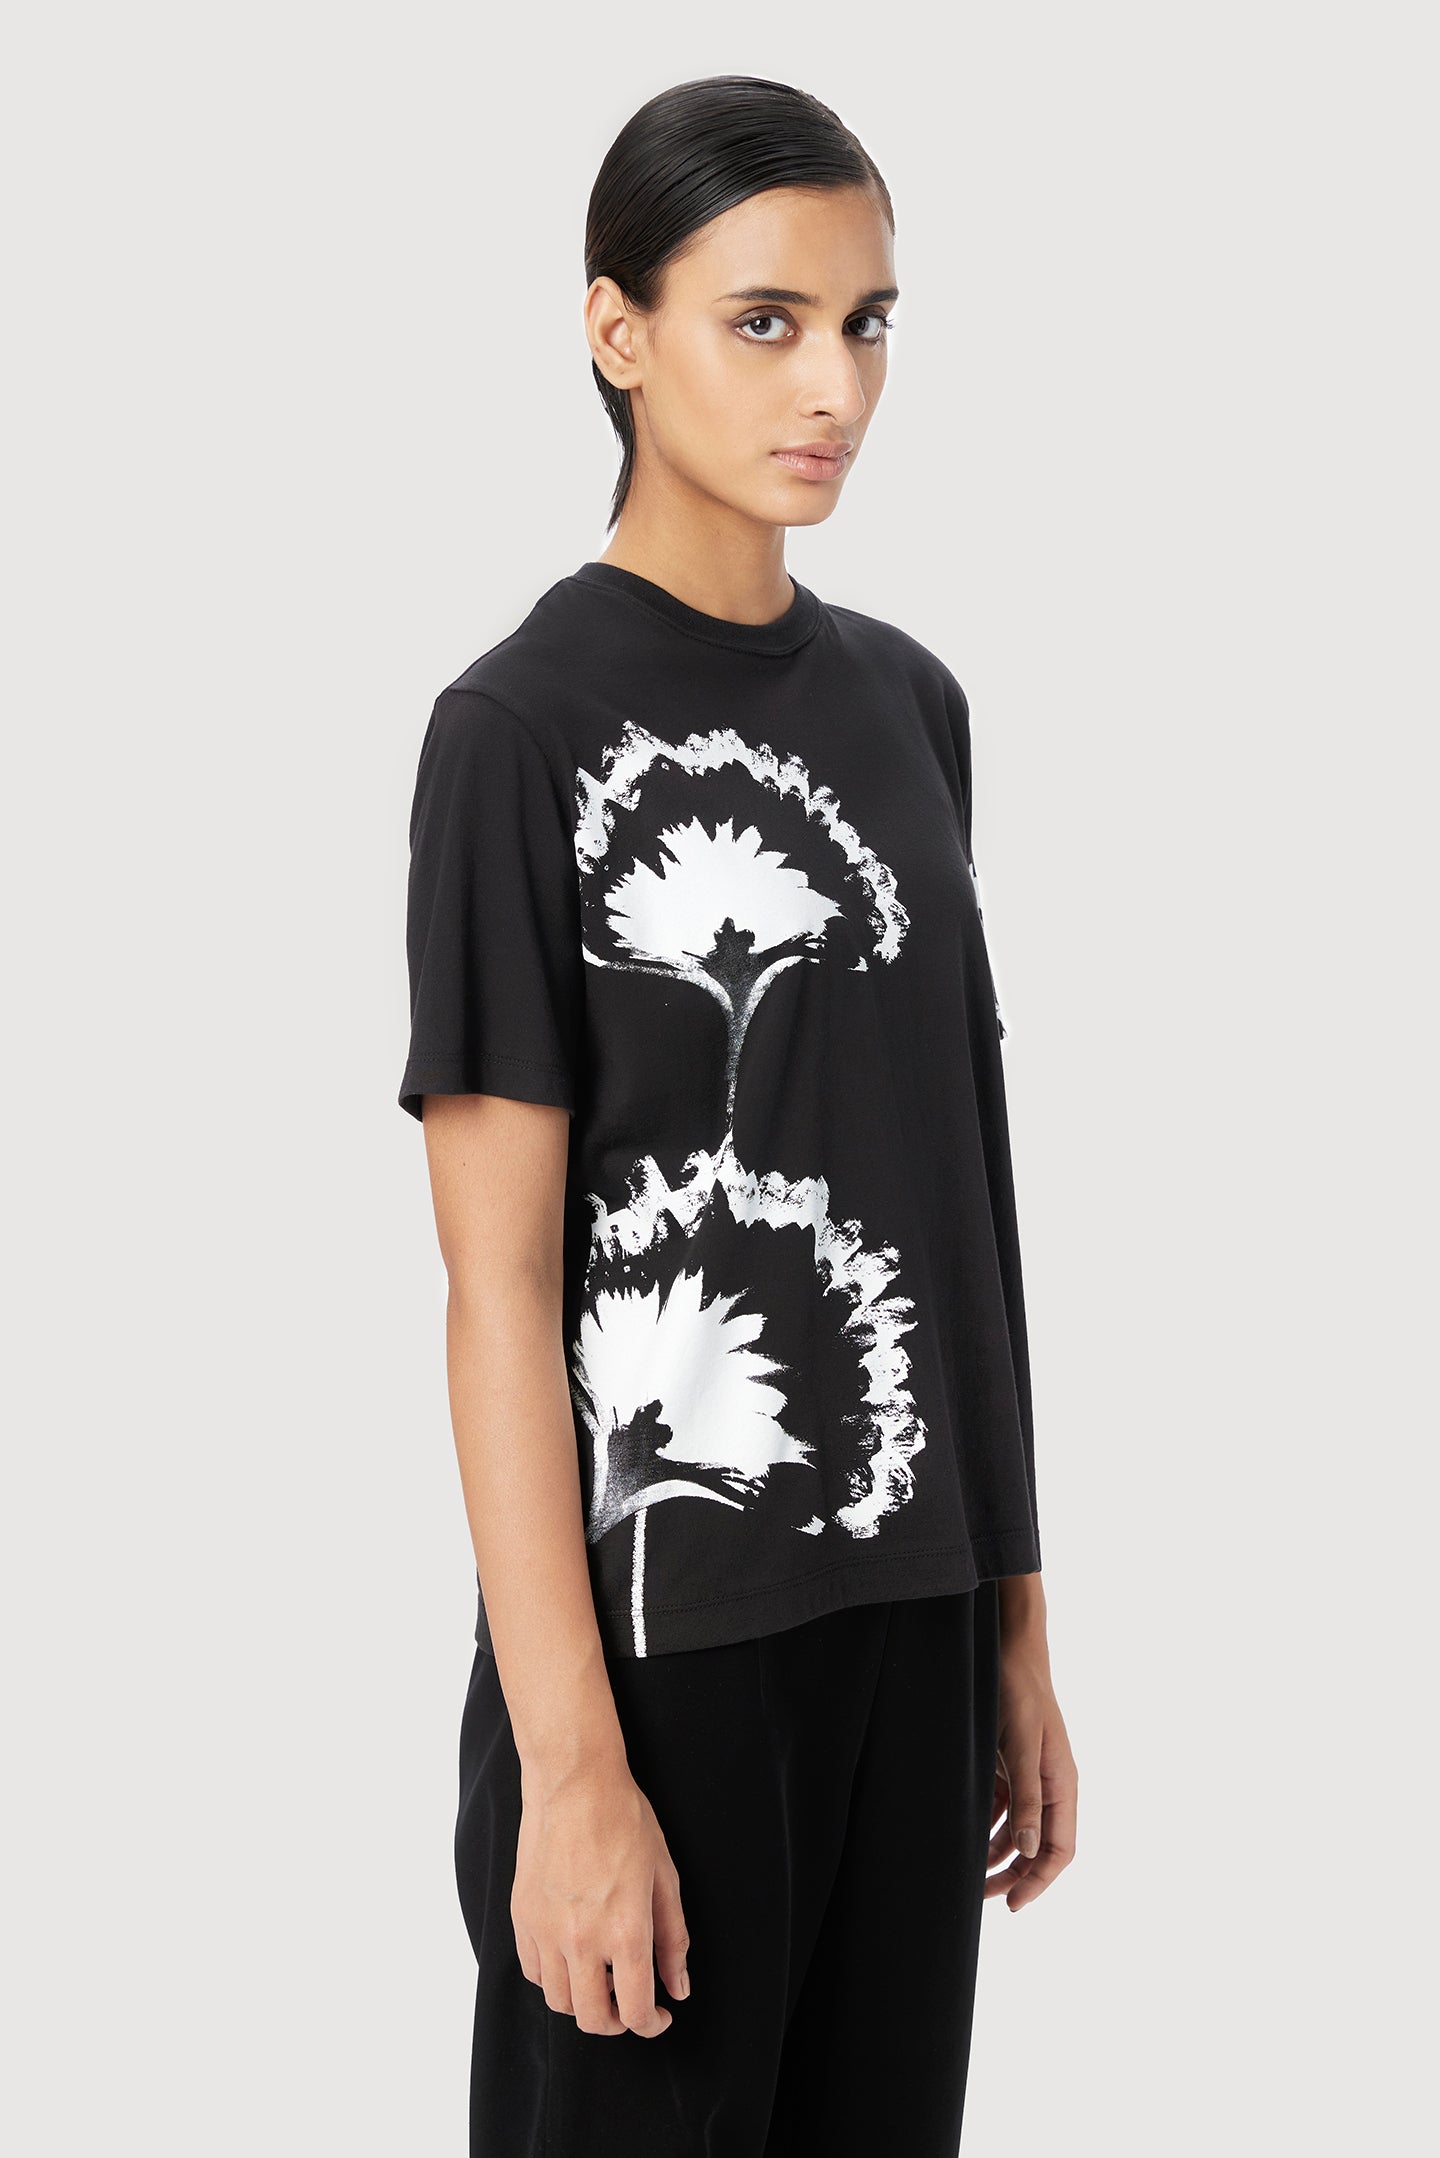 Regular Fit T-Shirt Featuring Stylish Gingko Print Placement